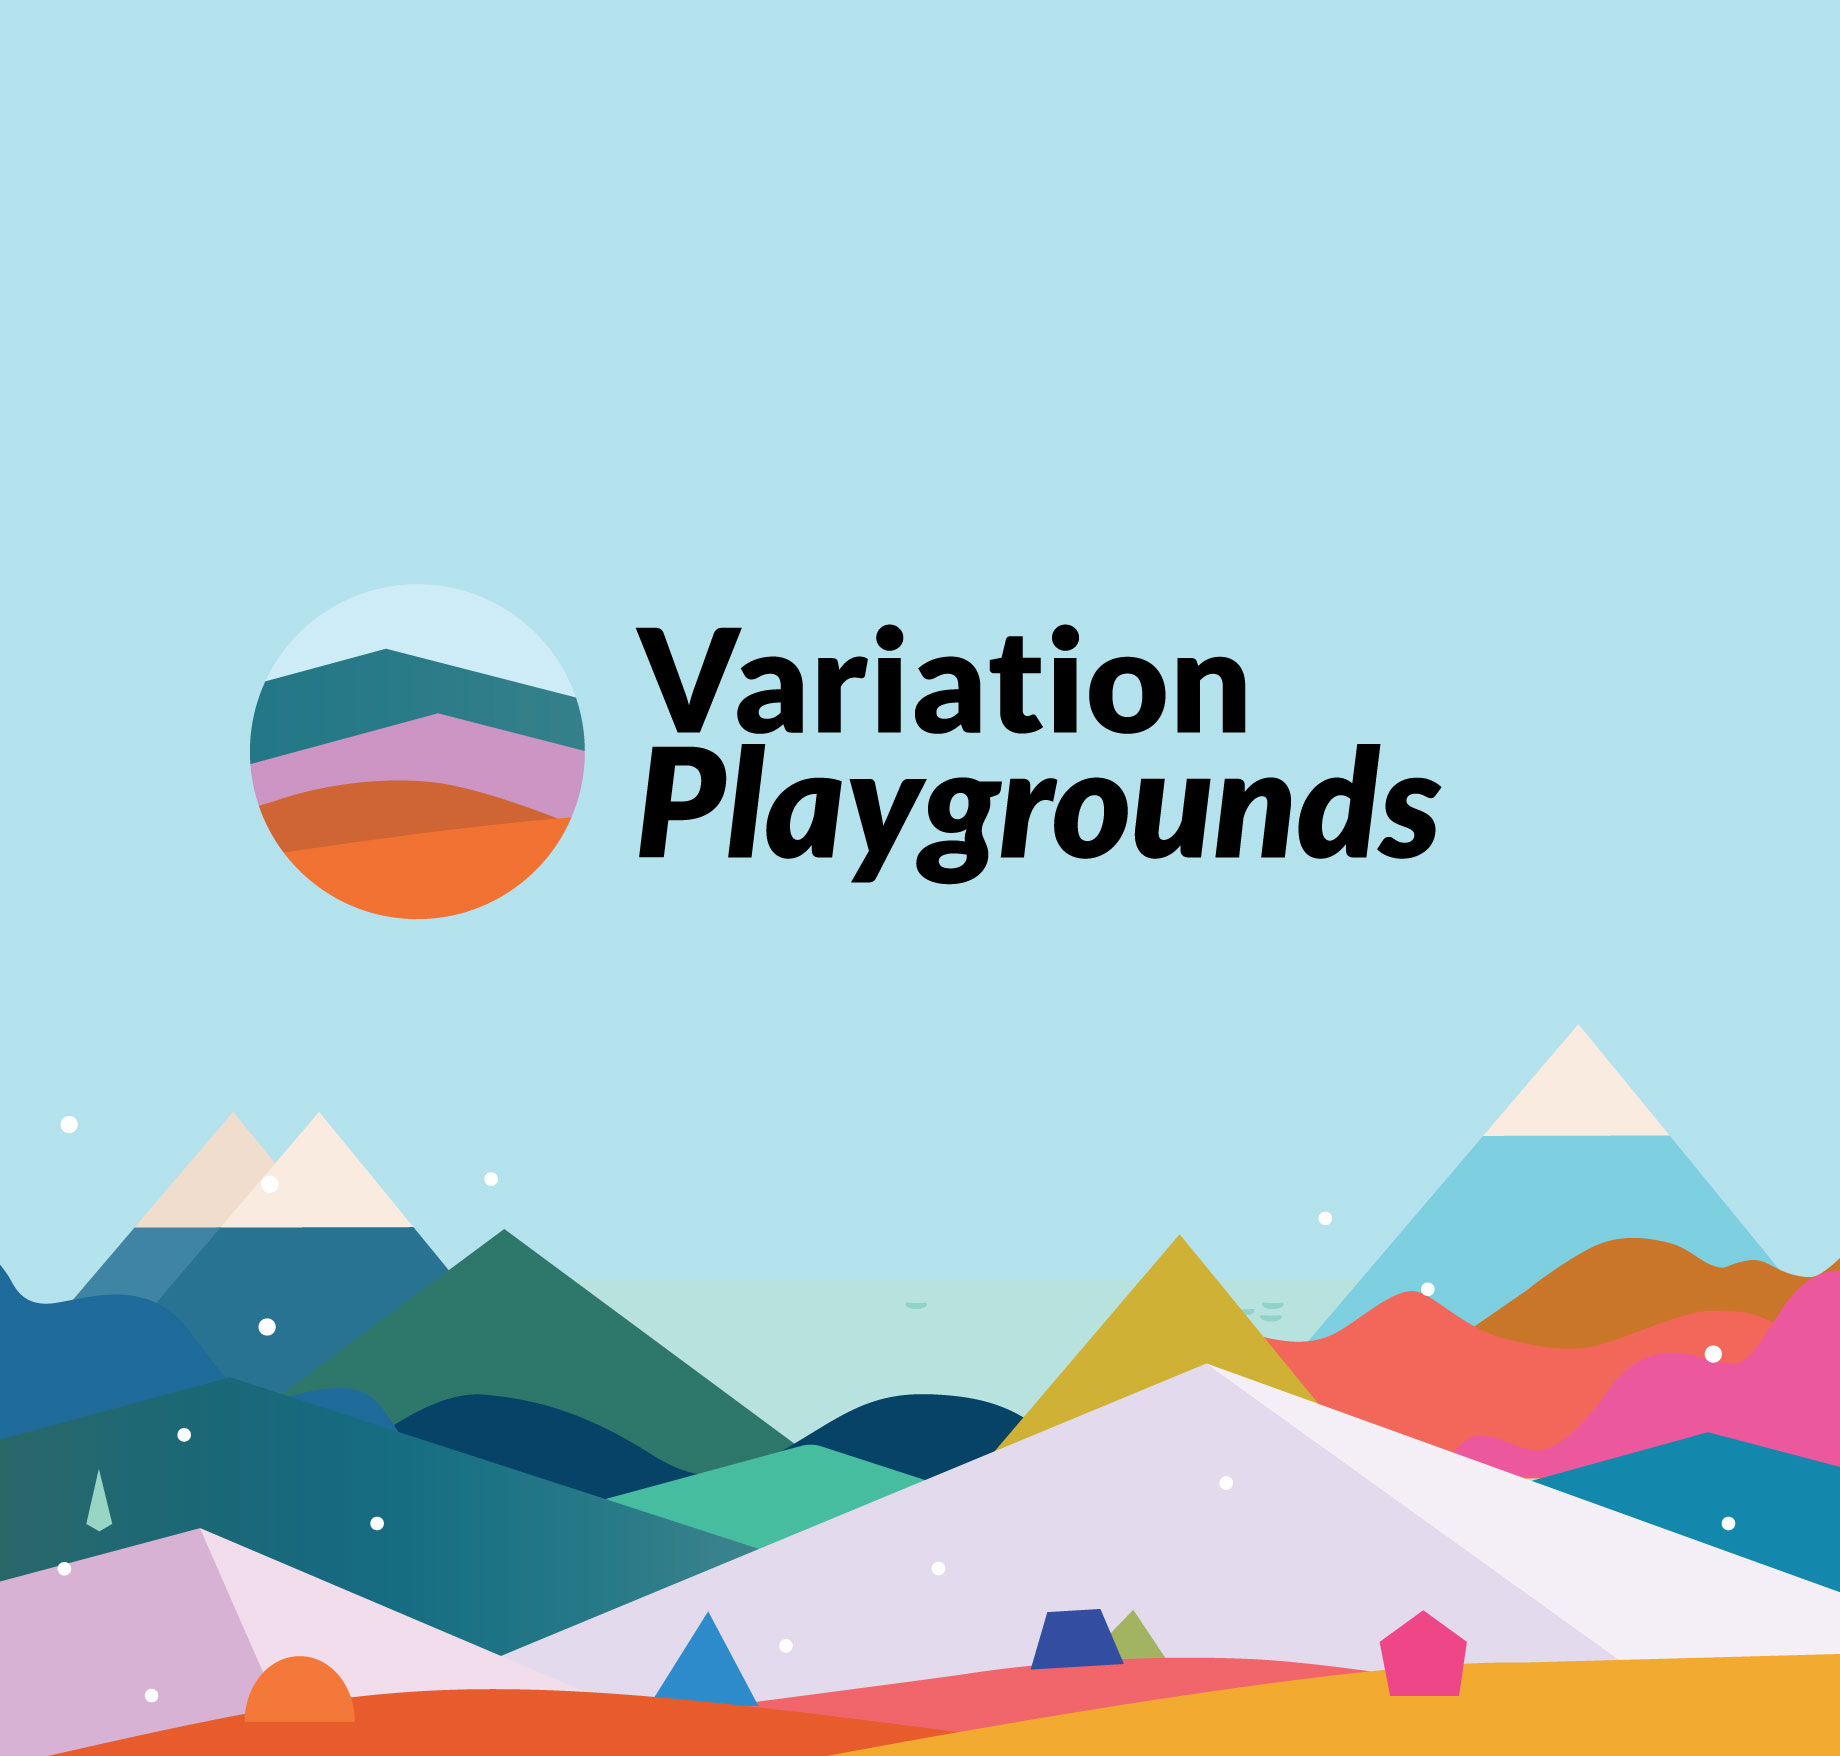 Variation Playgrounds